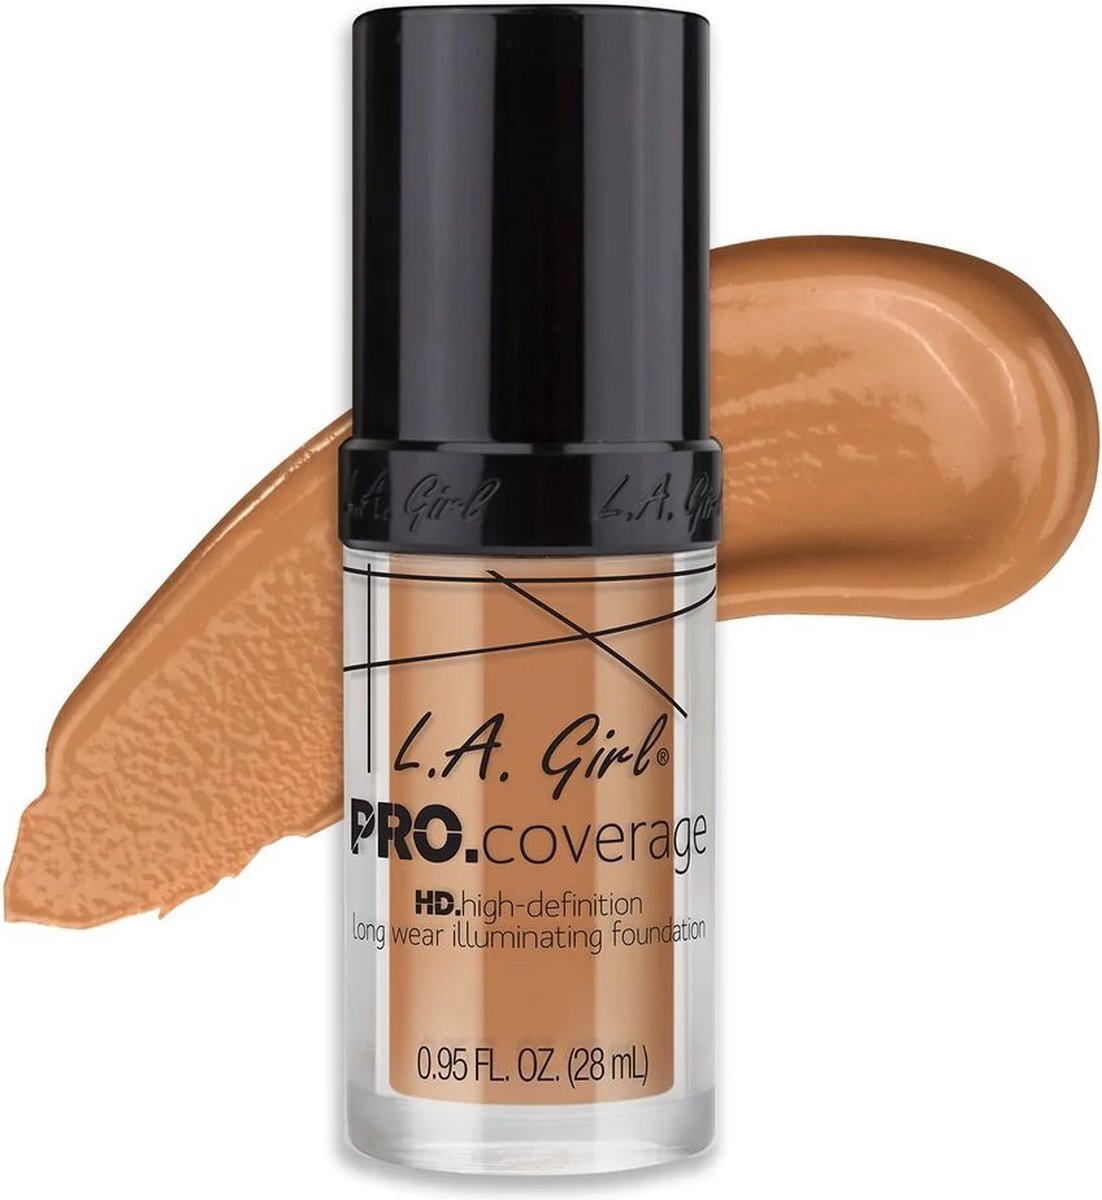 L.A. Girl L.A. Girl Pro Coverage HD Foundation Softhoney